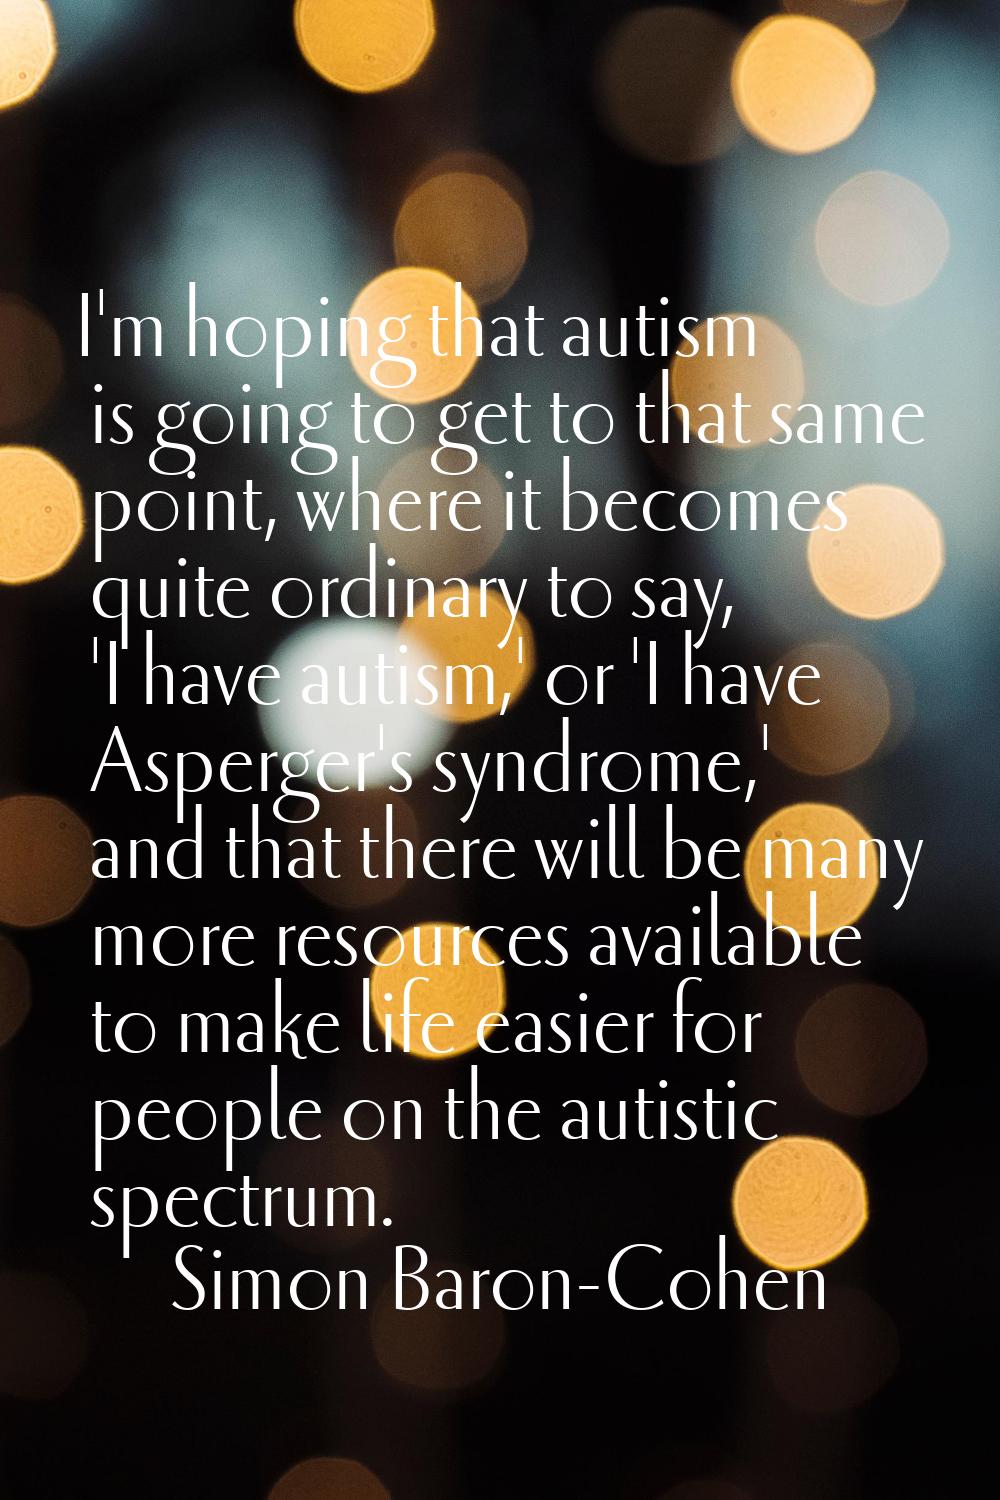 I'm hoping that autism is going to get to that same point, where it becomes quite ordinary to say, 